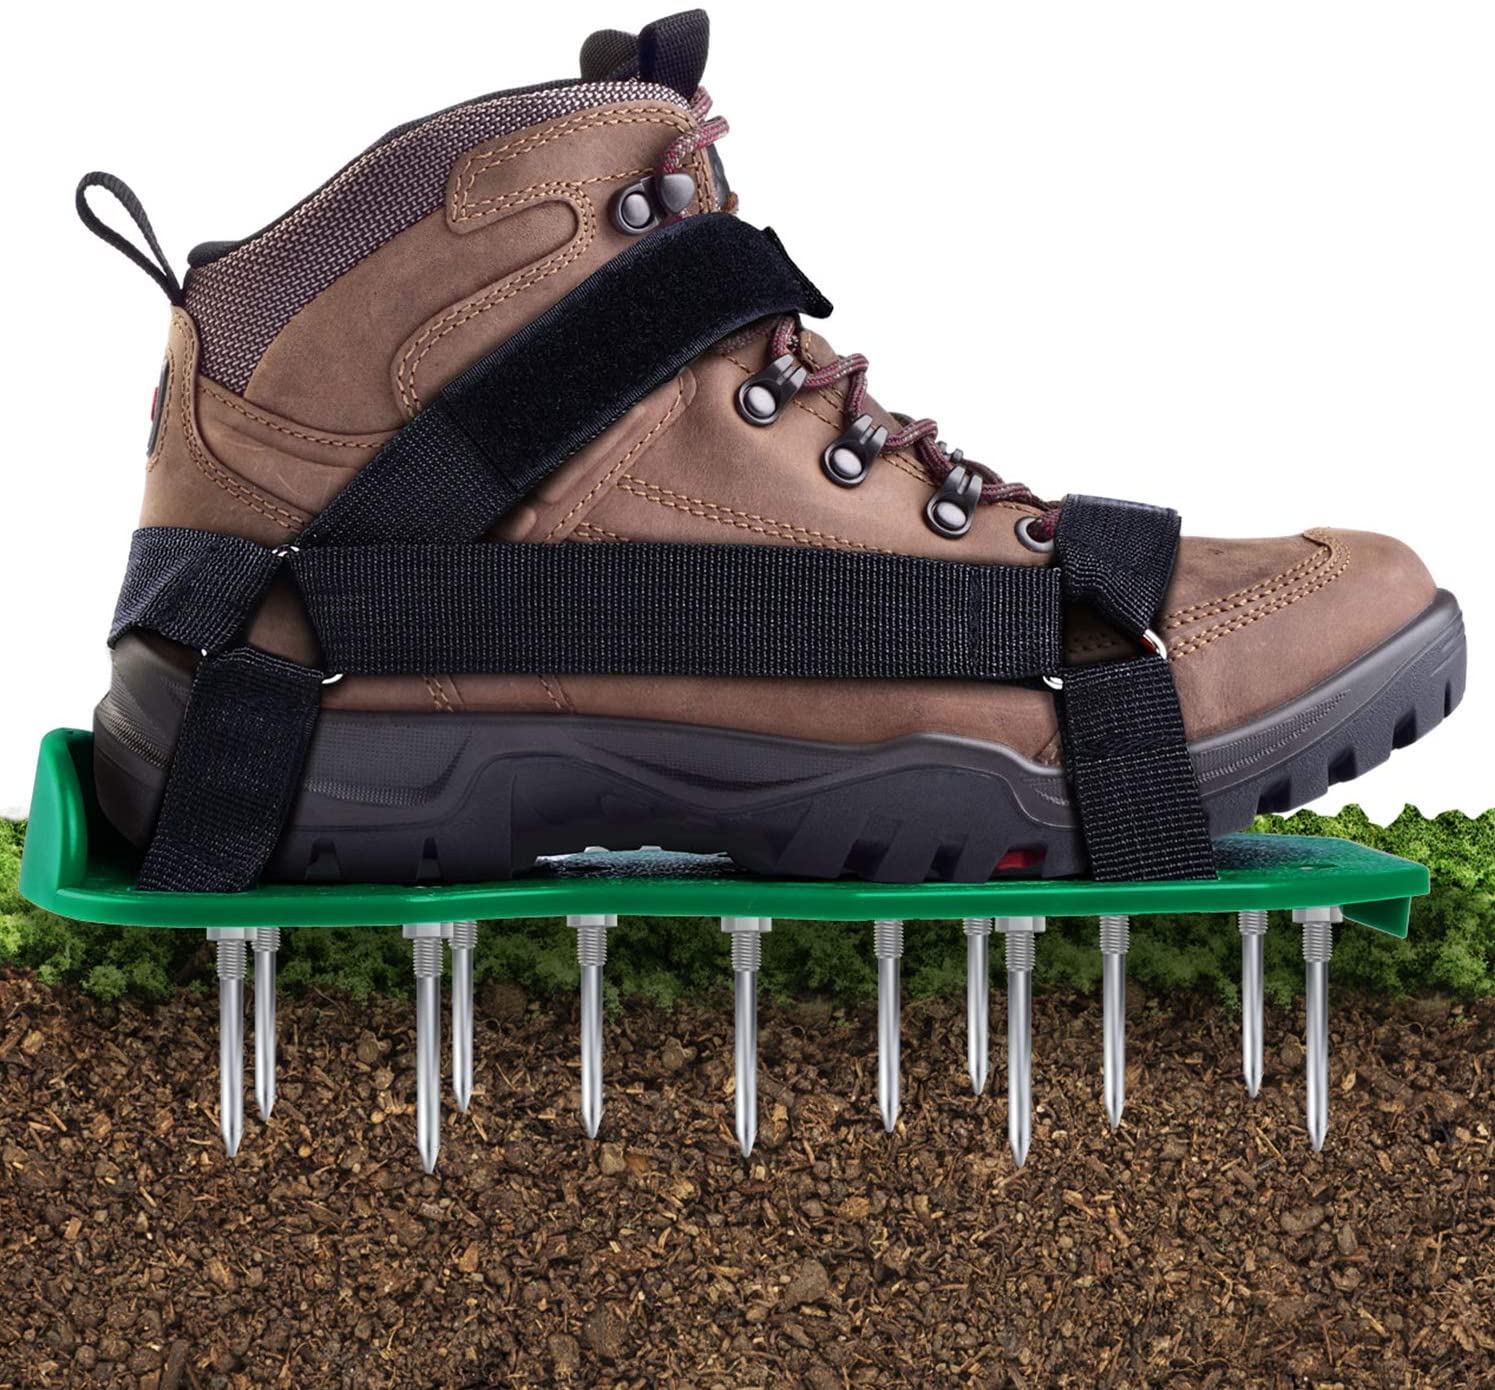 Ohuhu Lawn Aerator Shoes with Hook & Loop Straps